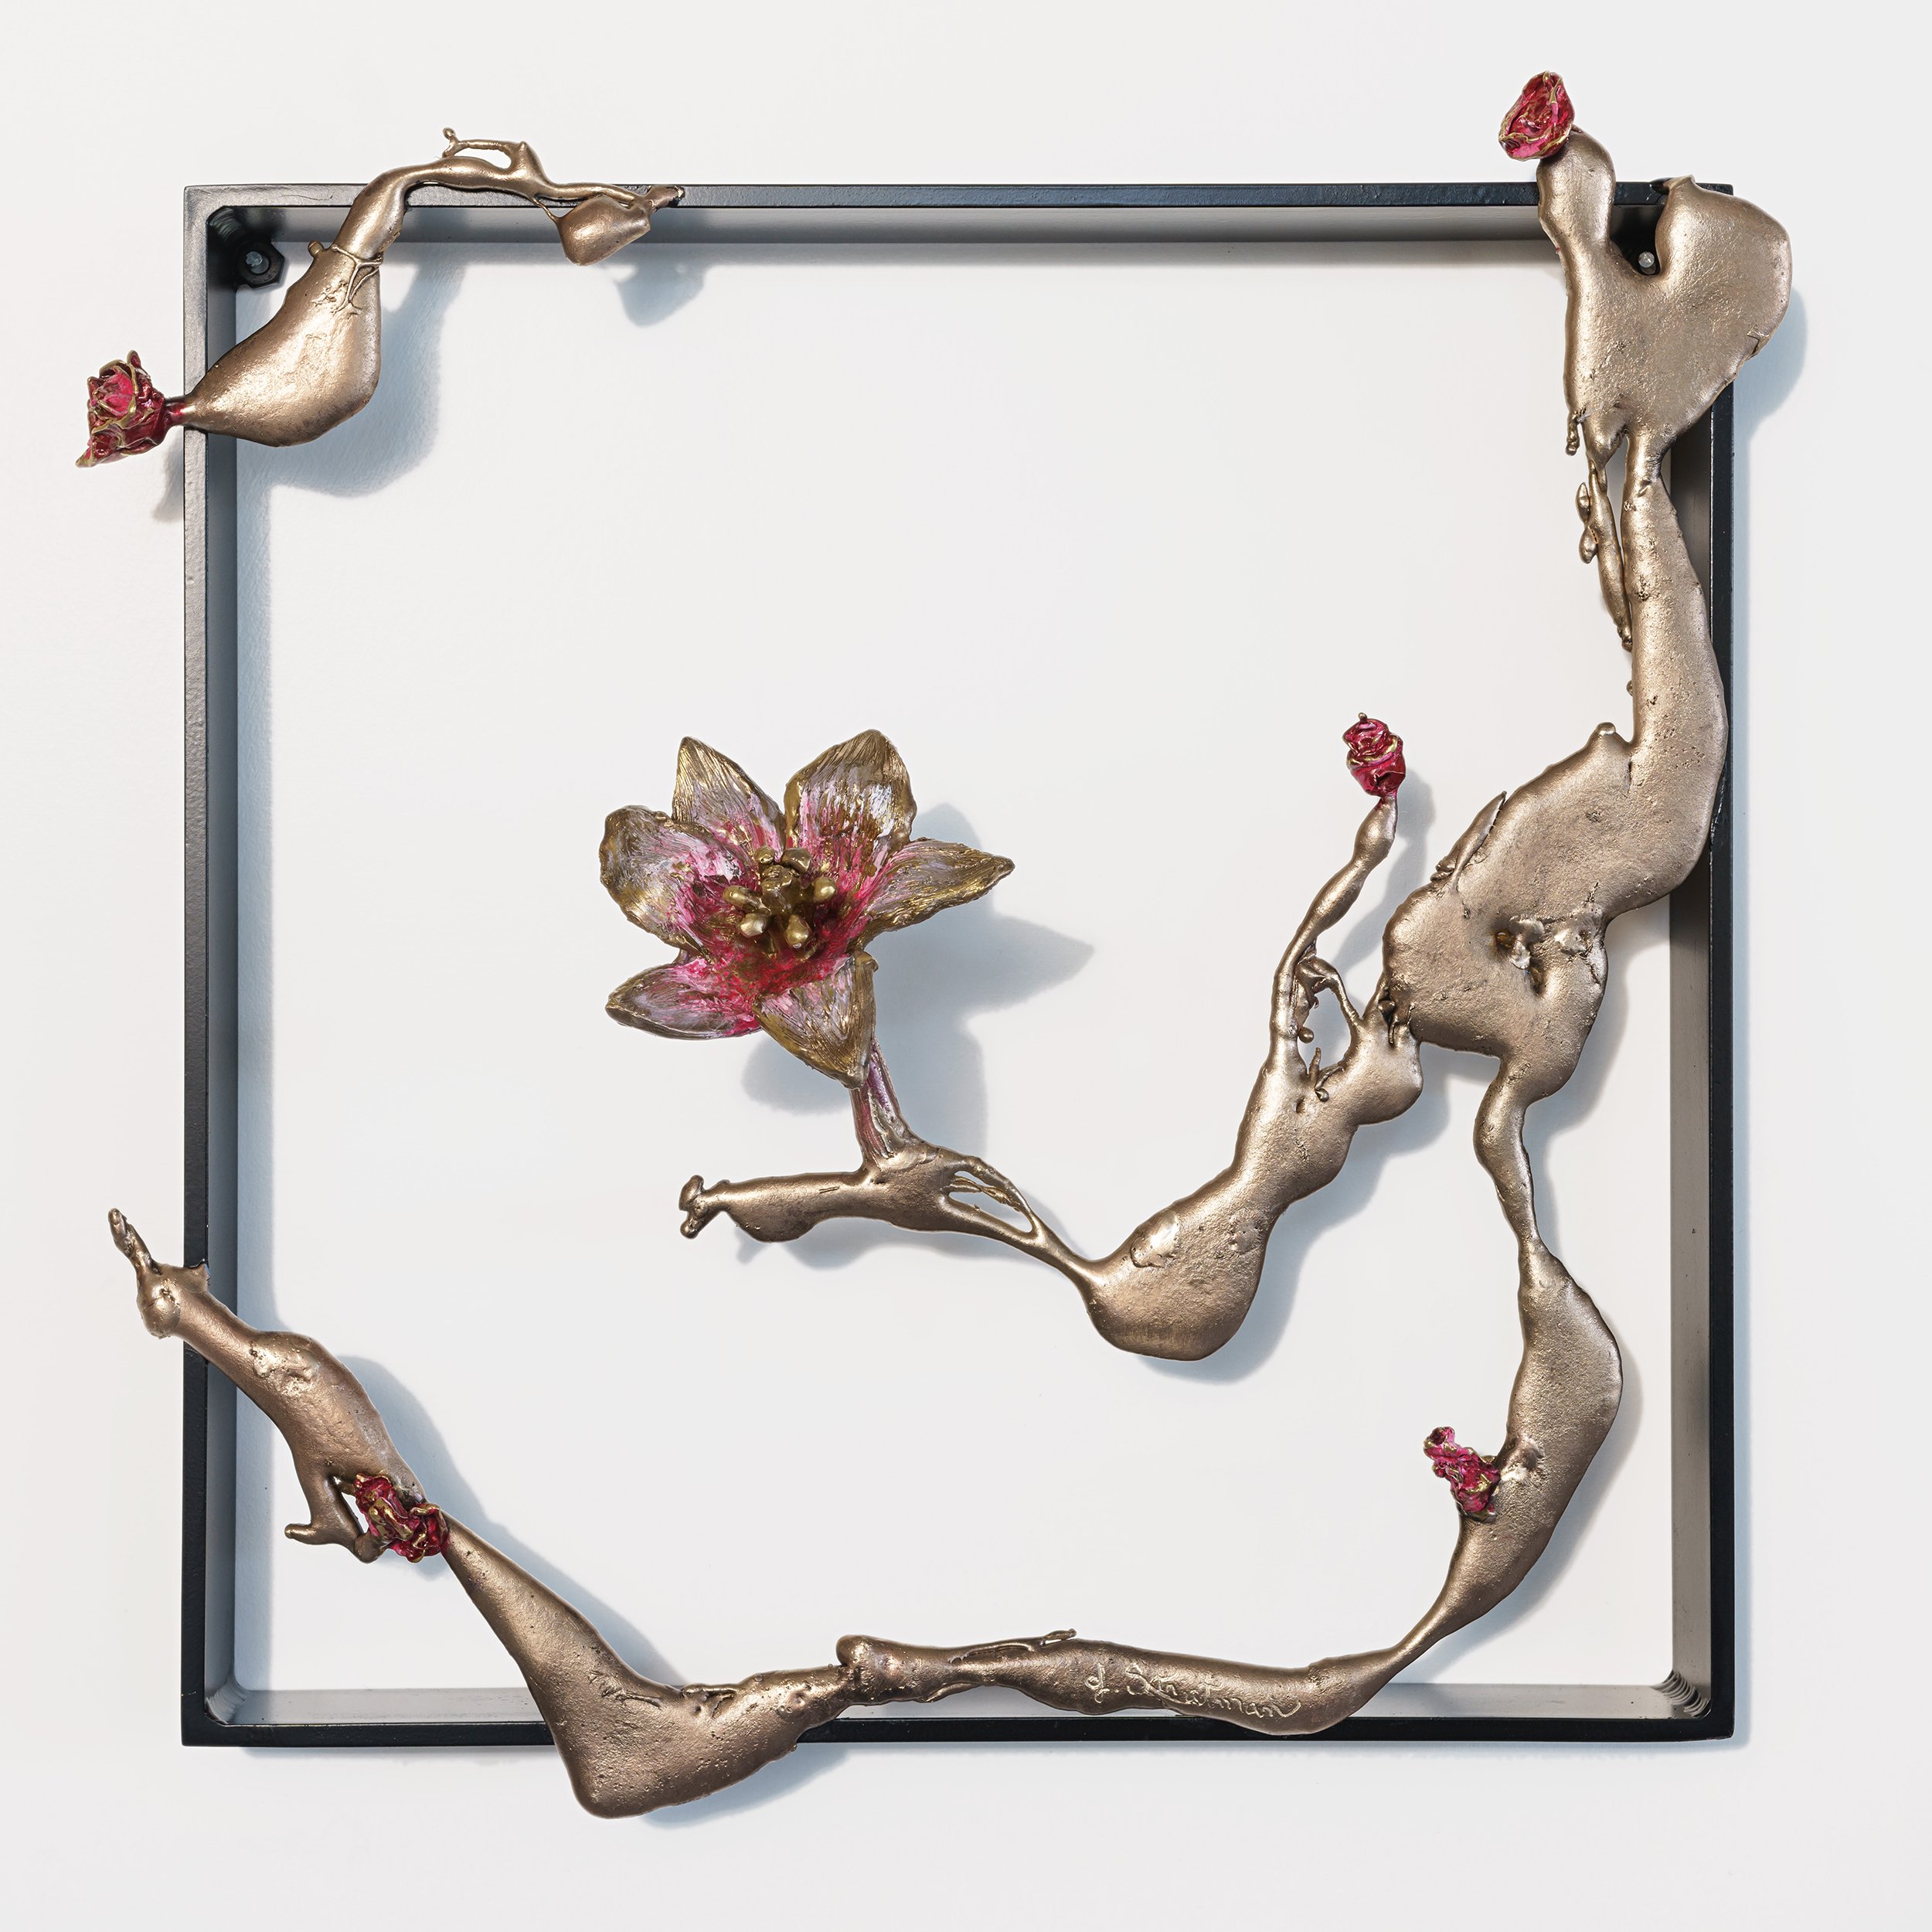 In Dreams of Spring - Bronze Wall Sculpture